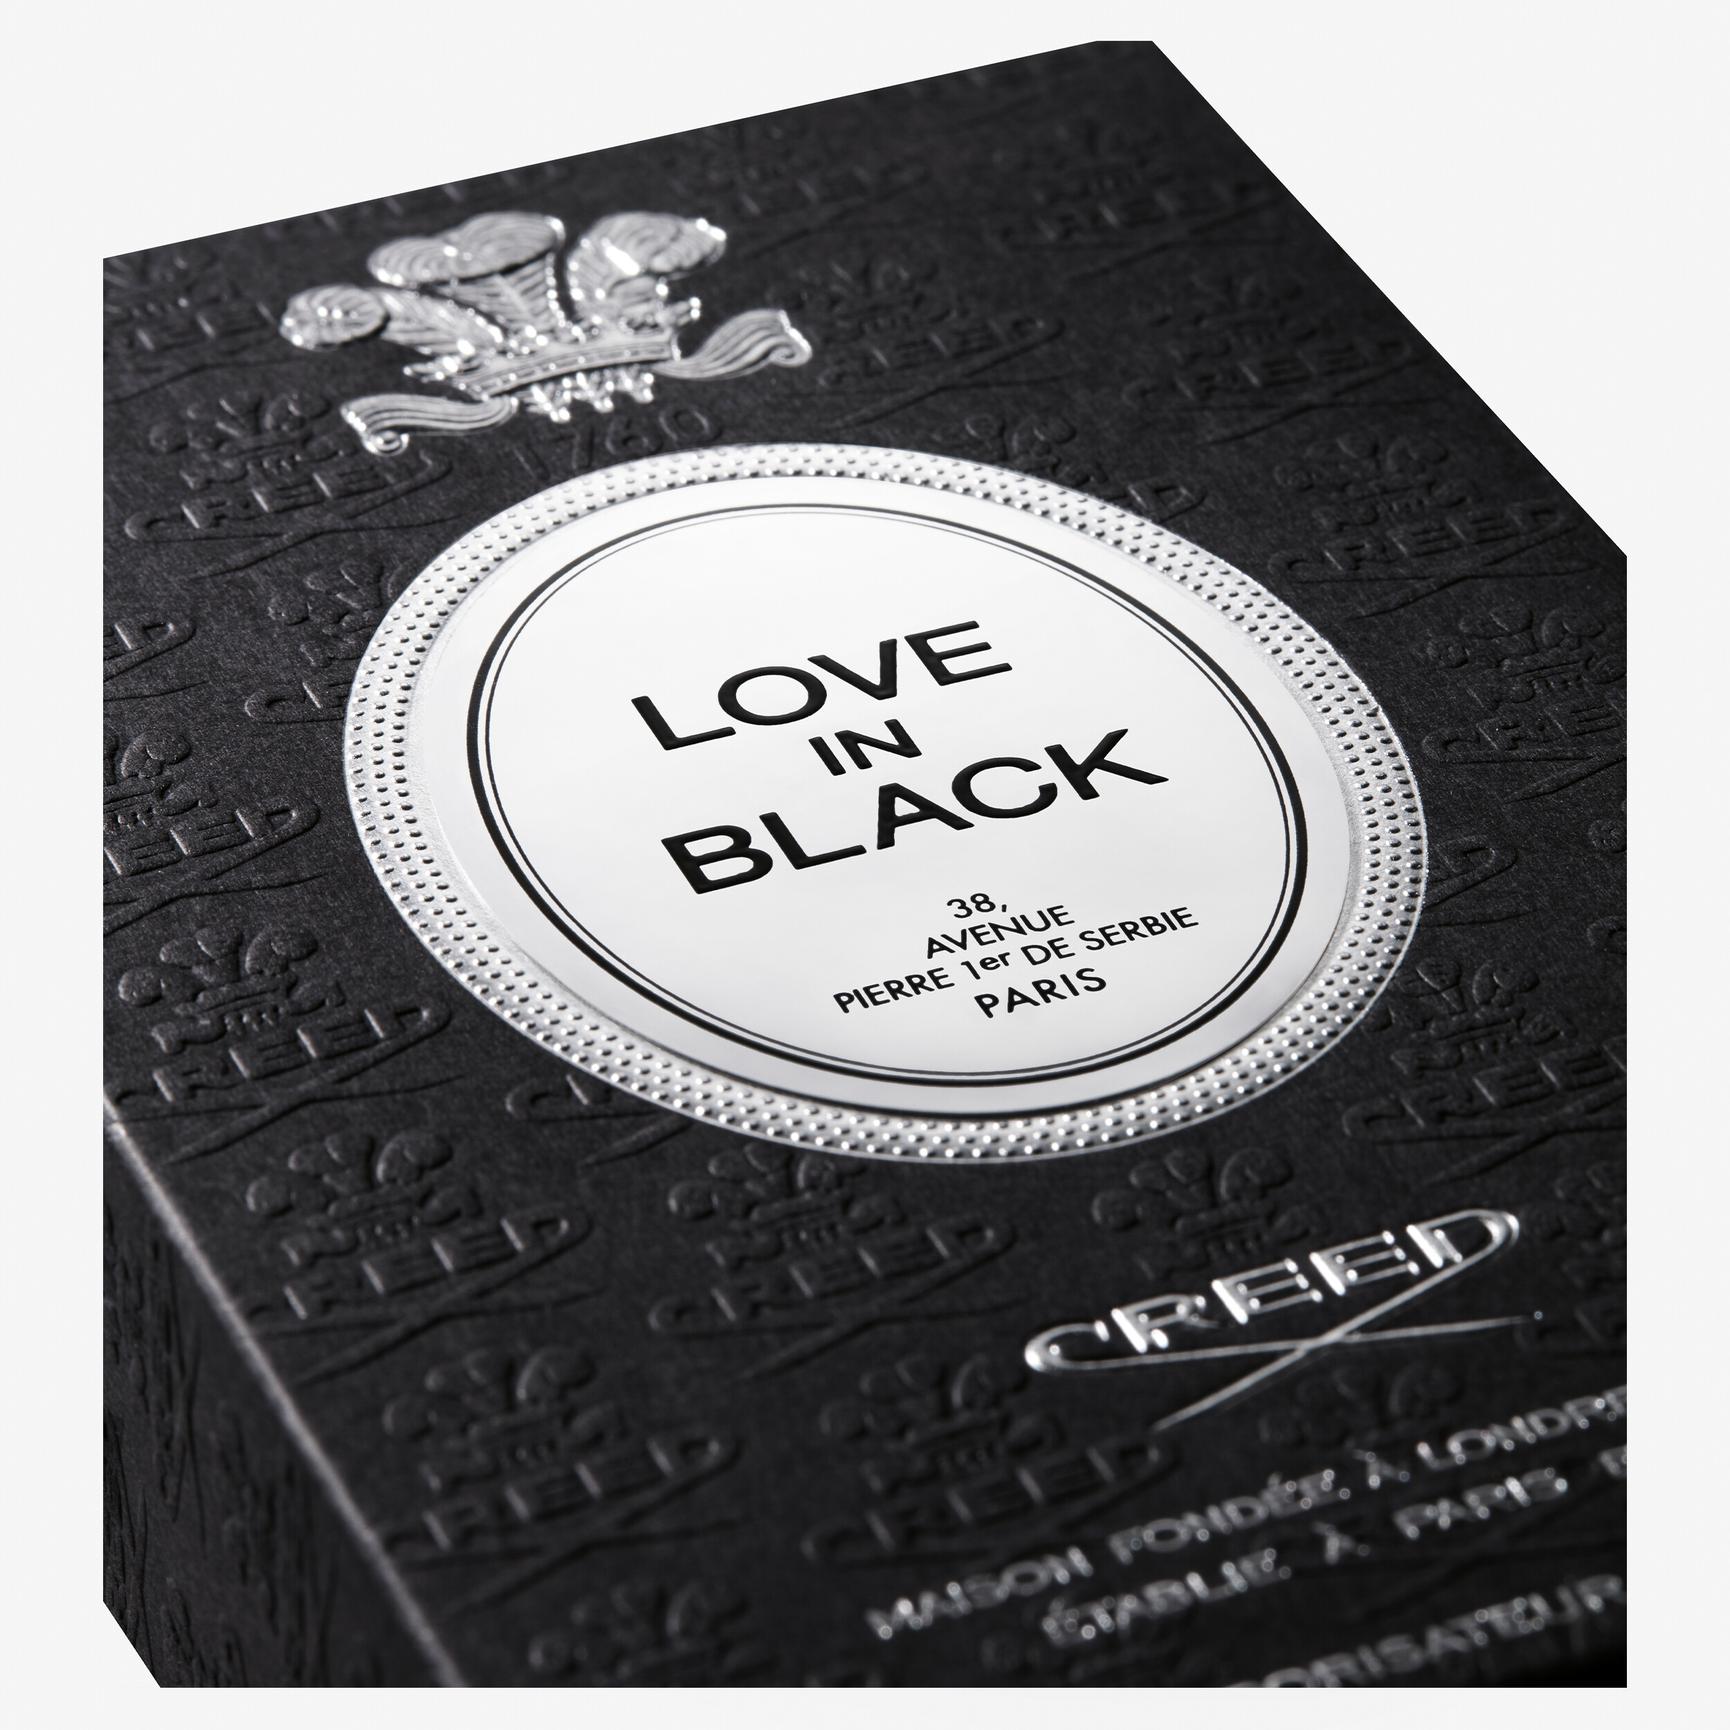 Creed Love In Black Edp For Women